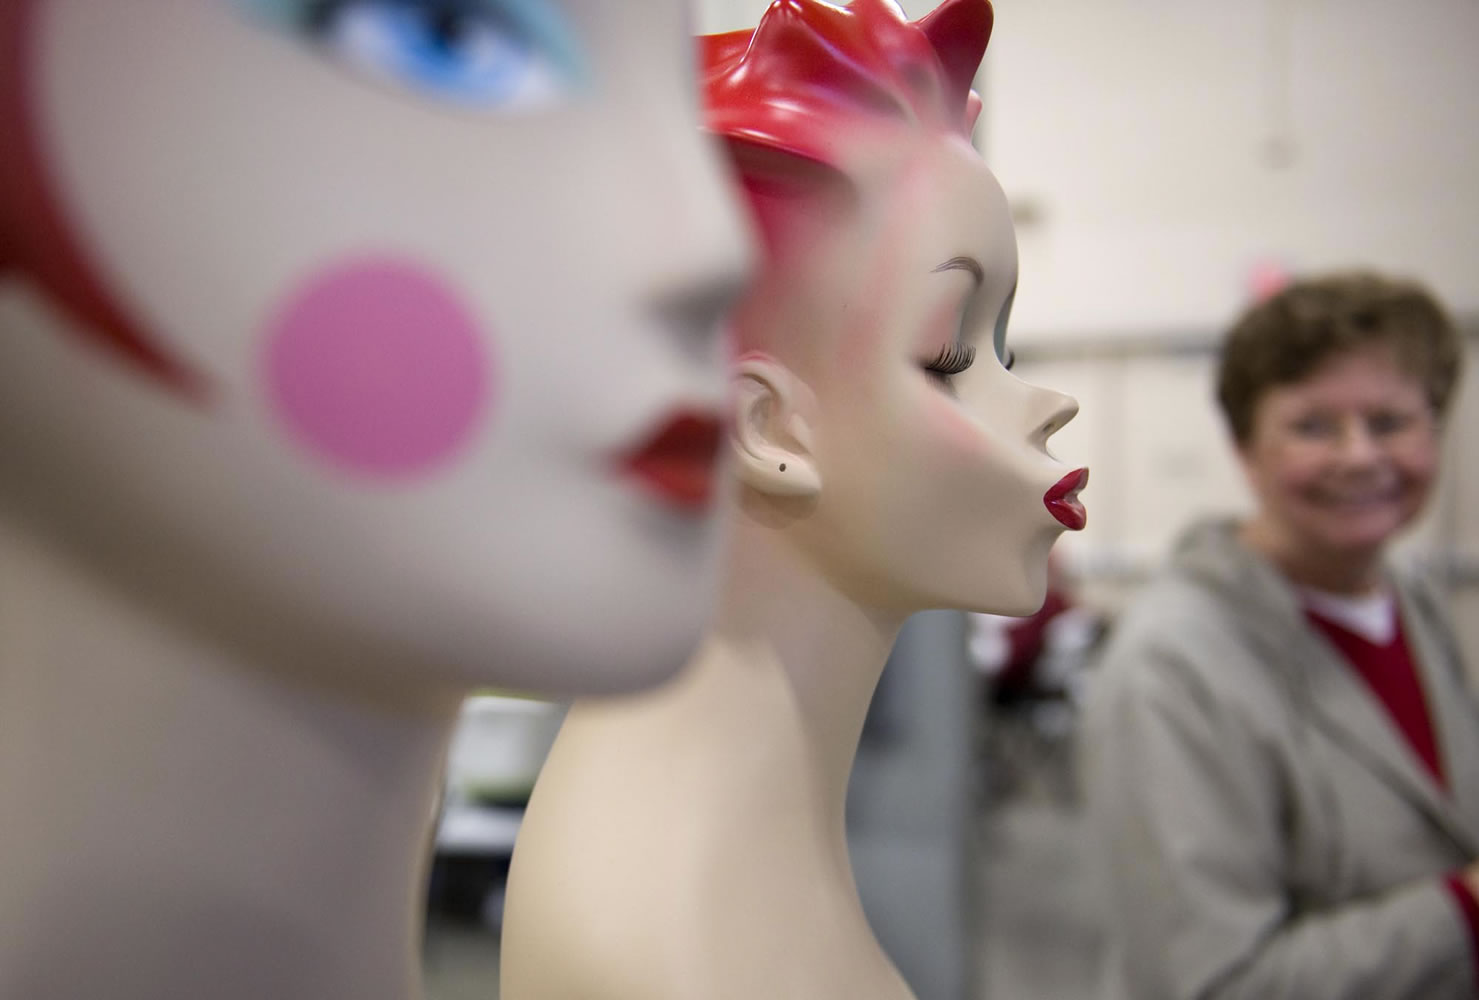 Sherry Ungrodt, right, glances at antique mannequin heads once used to display jewelry at an antique show inside the Event Center at the Clark County Fairgrounds in 2009.